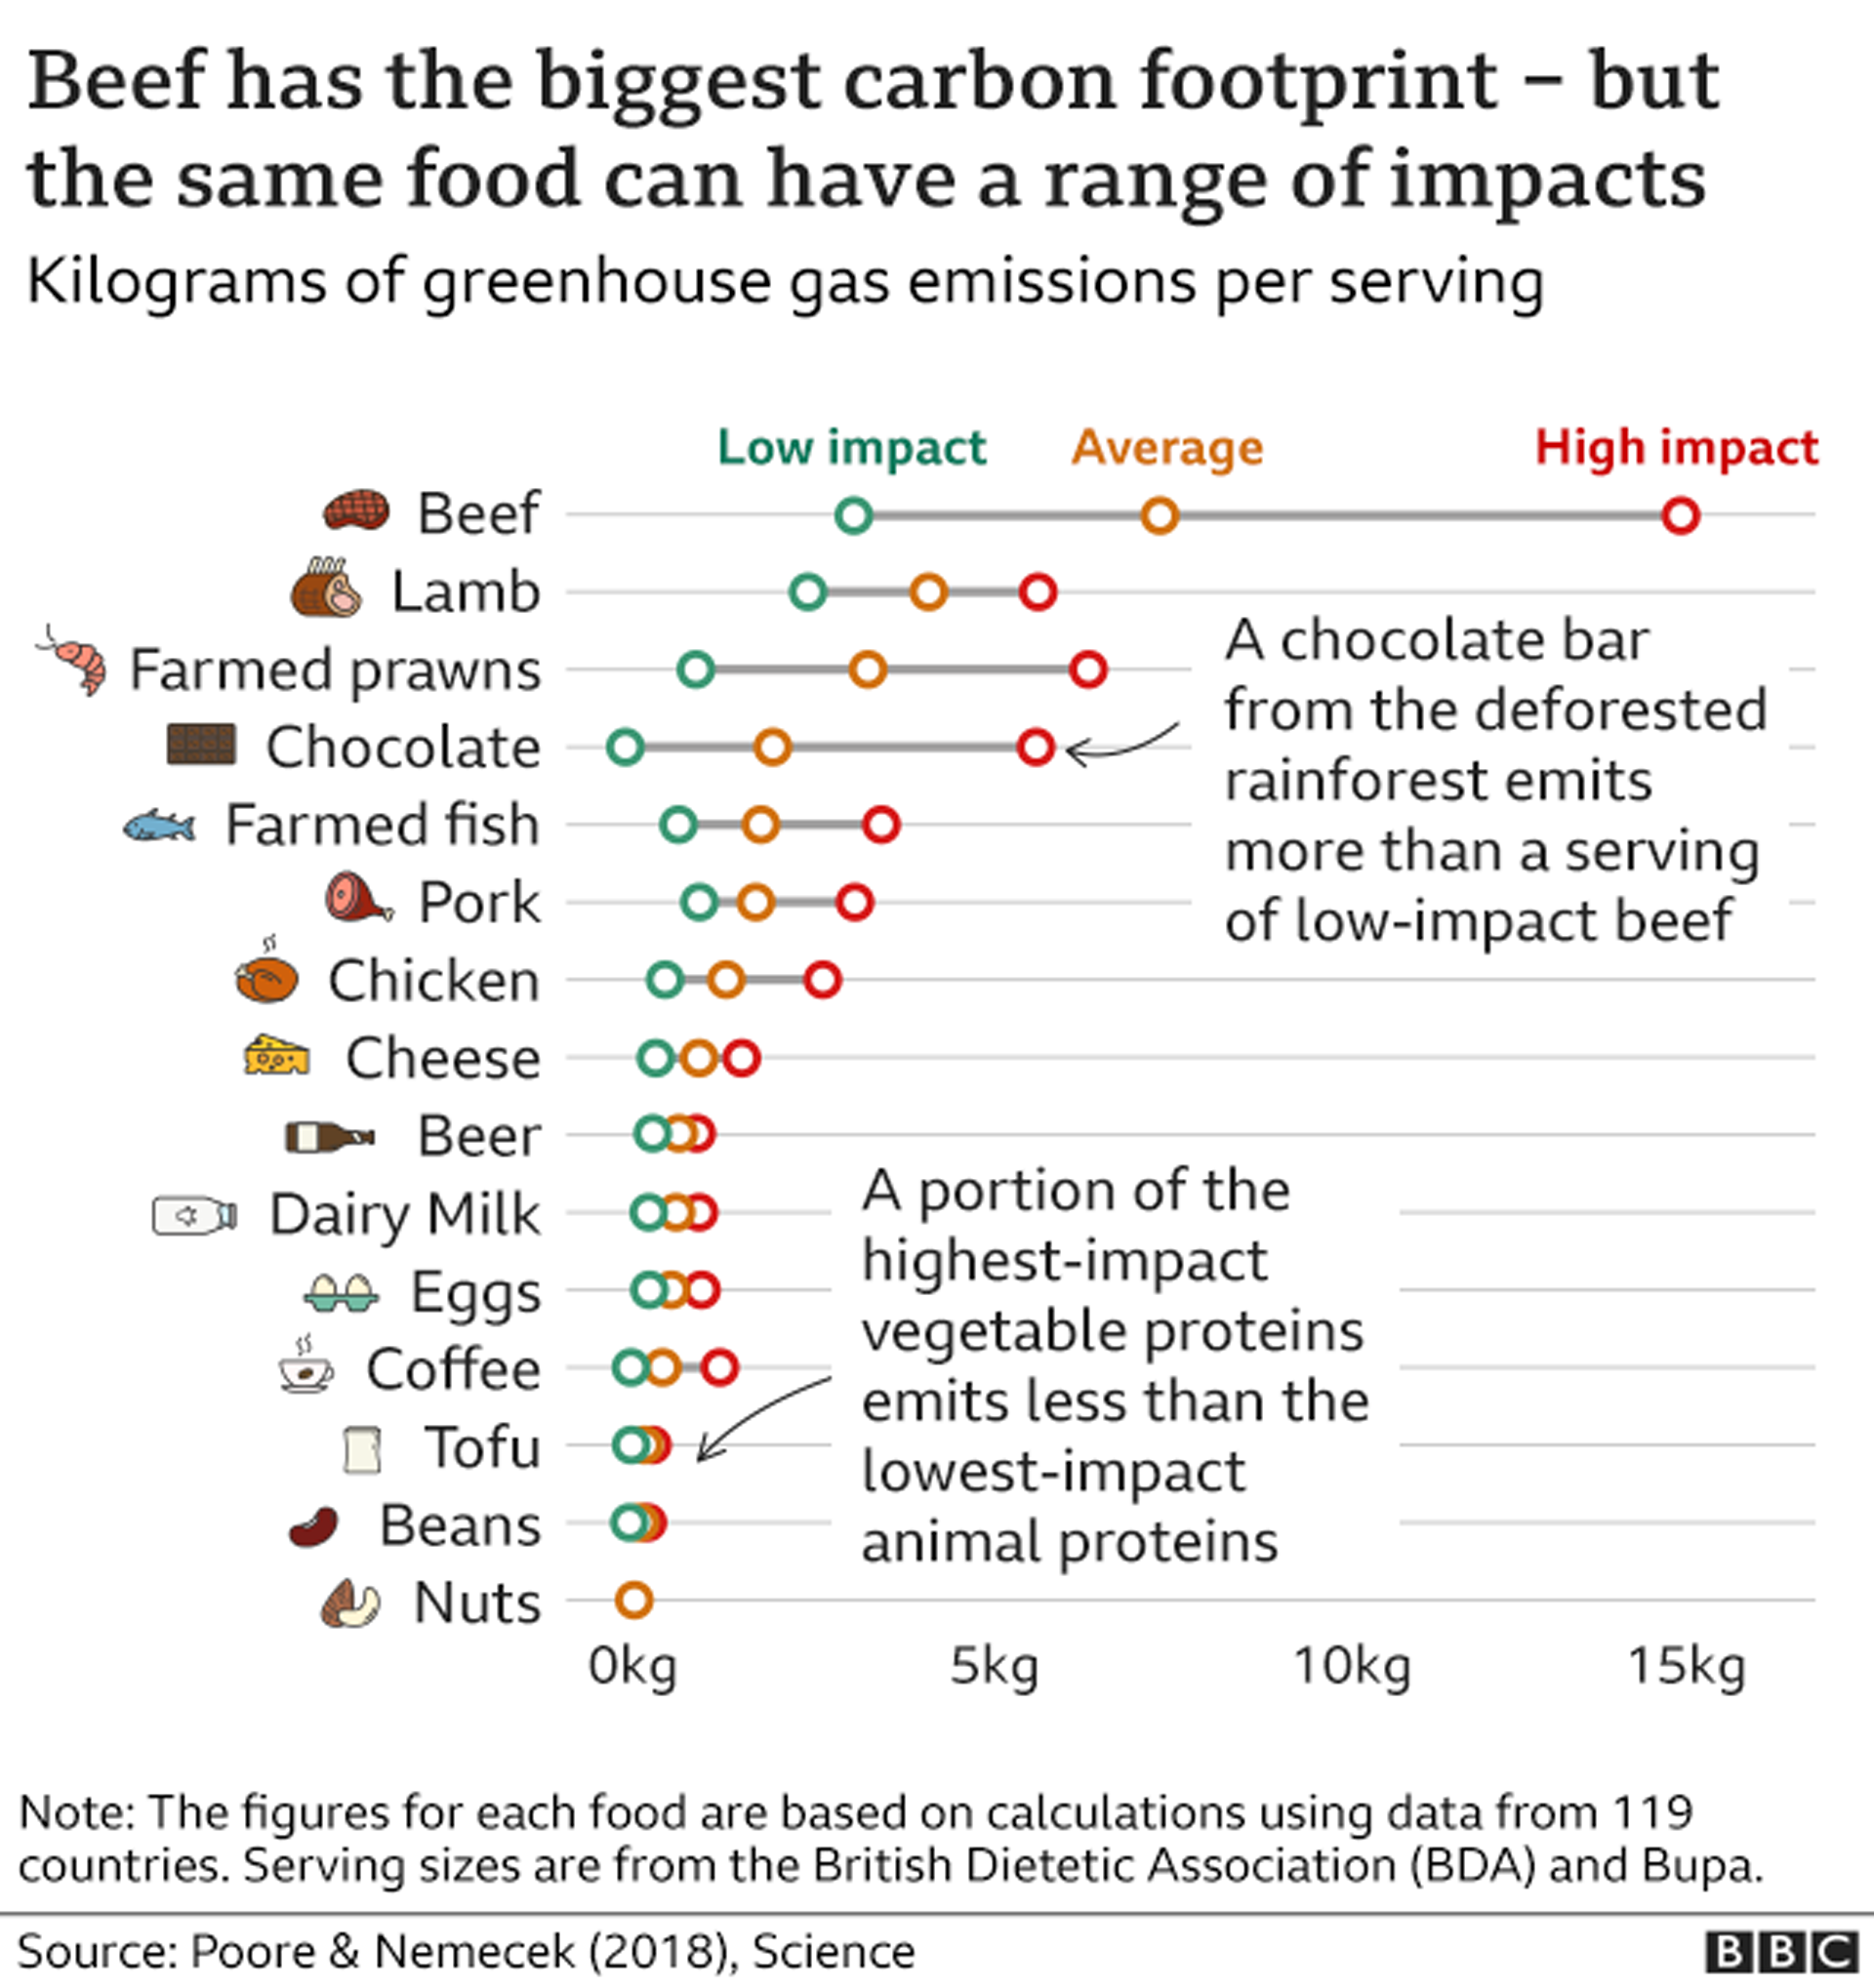 Chart showing the climate impacts of different foods: Beef has the highest carbon footprint, but the same food can have very different impacts